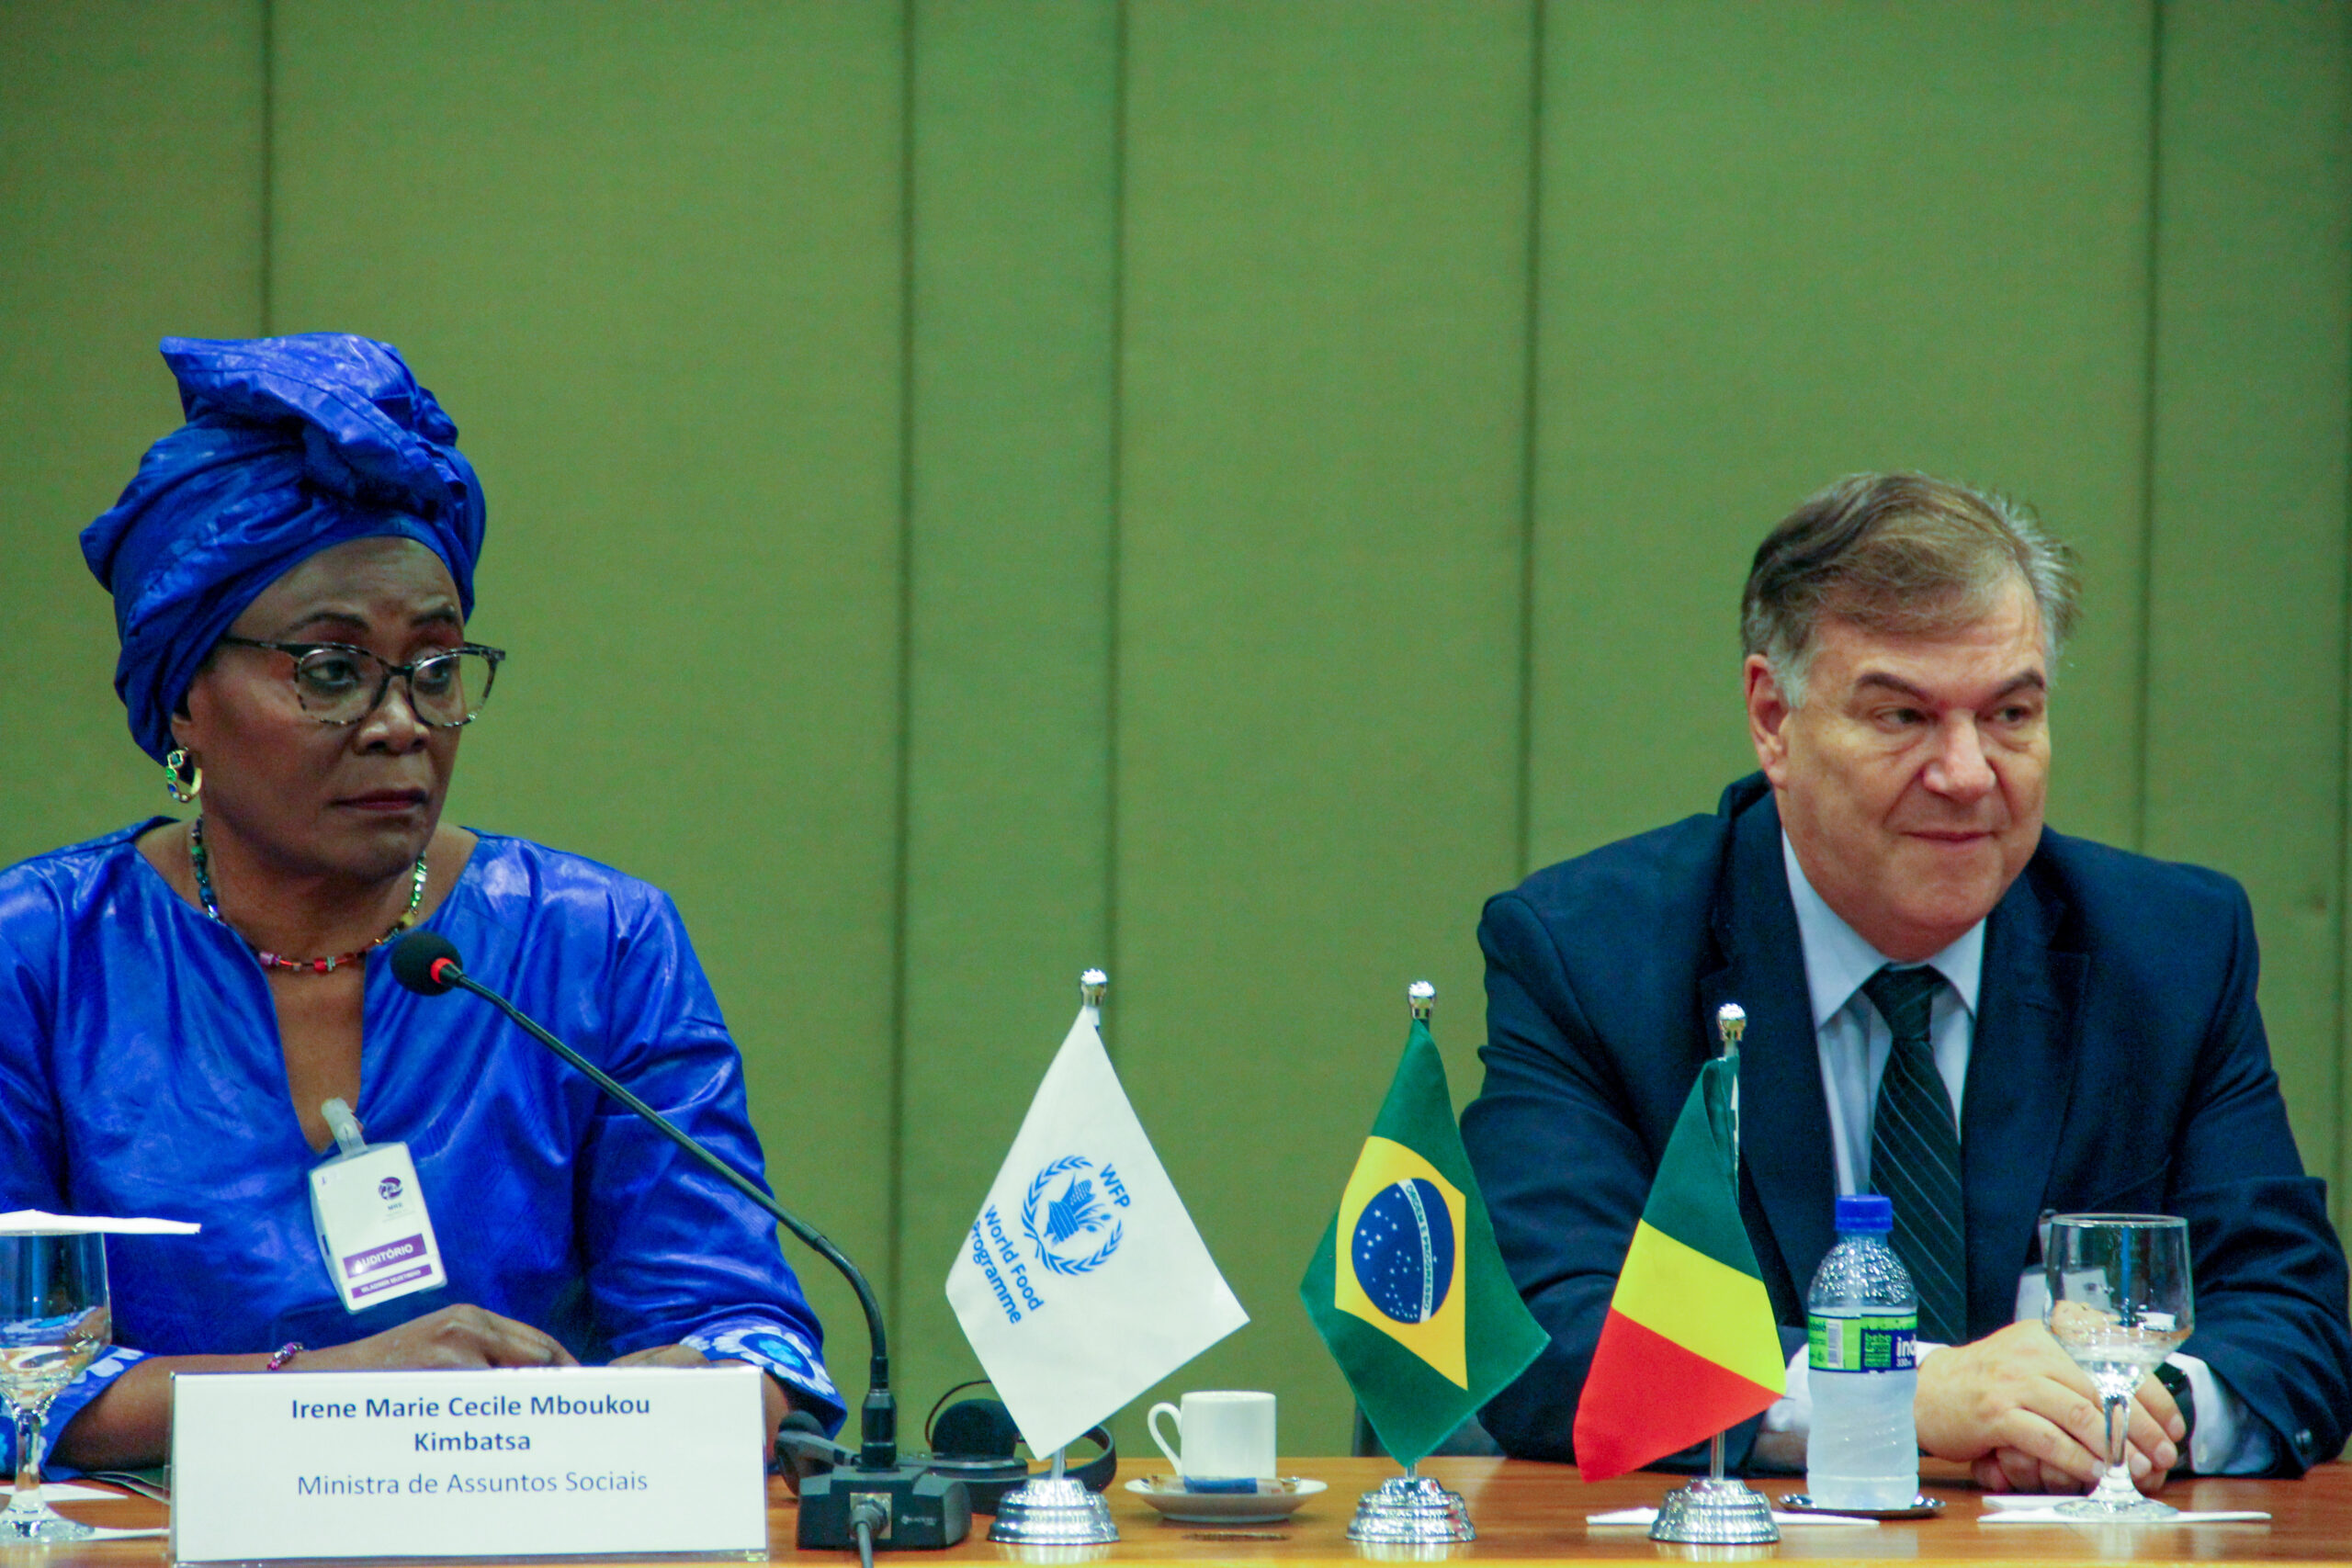 The photo shows the Minister of Social Affairs, Irene Marie Cecile Mboukou Kimbtasa, a black woman wearing a blue blouse and turban, on the left, and the Director of the Center of Excellence, Daniel Balaban, a white man wearing a dark suit and tie, on the right.